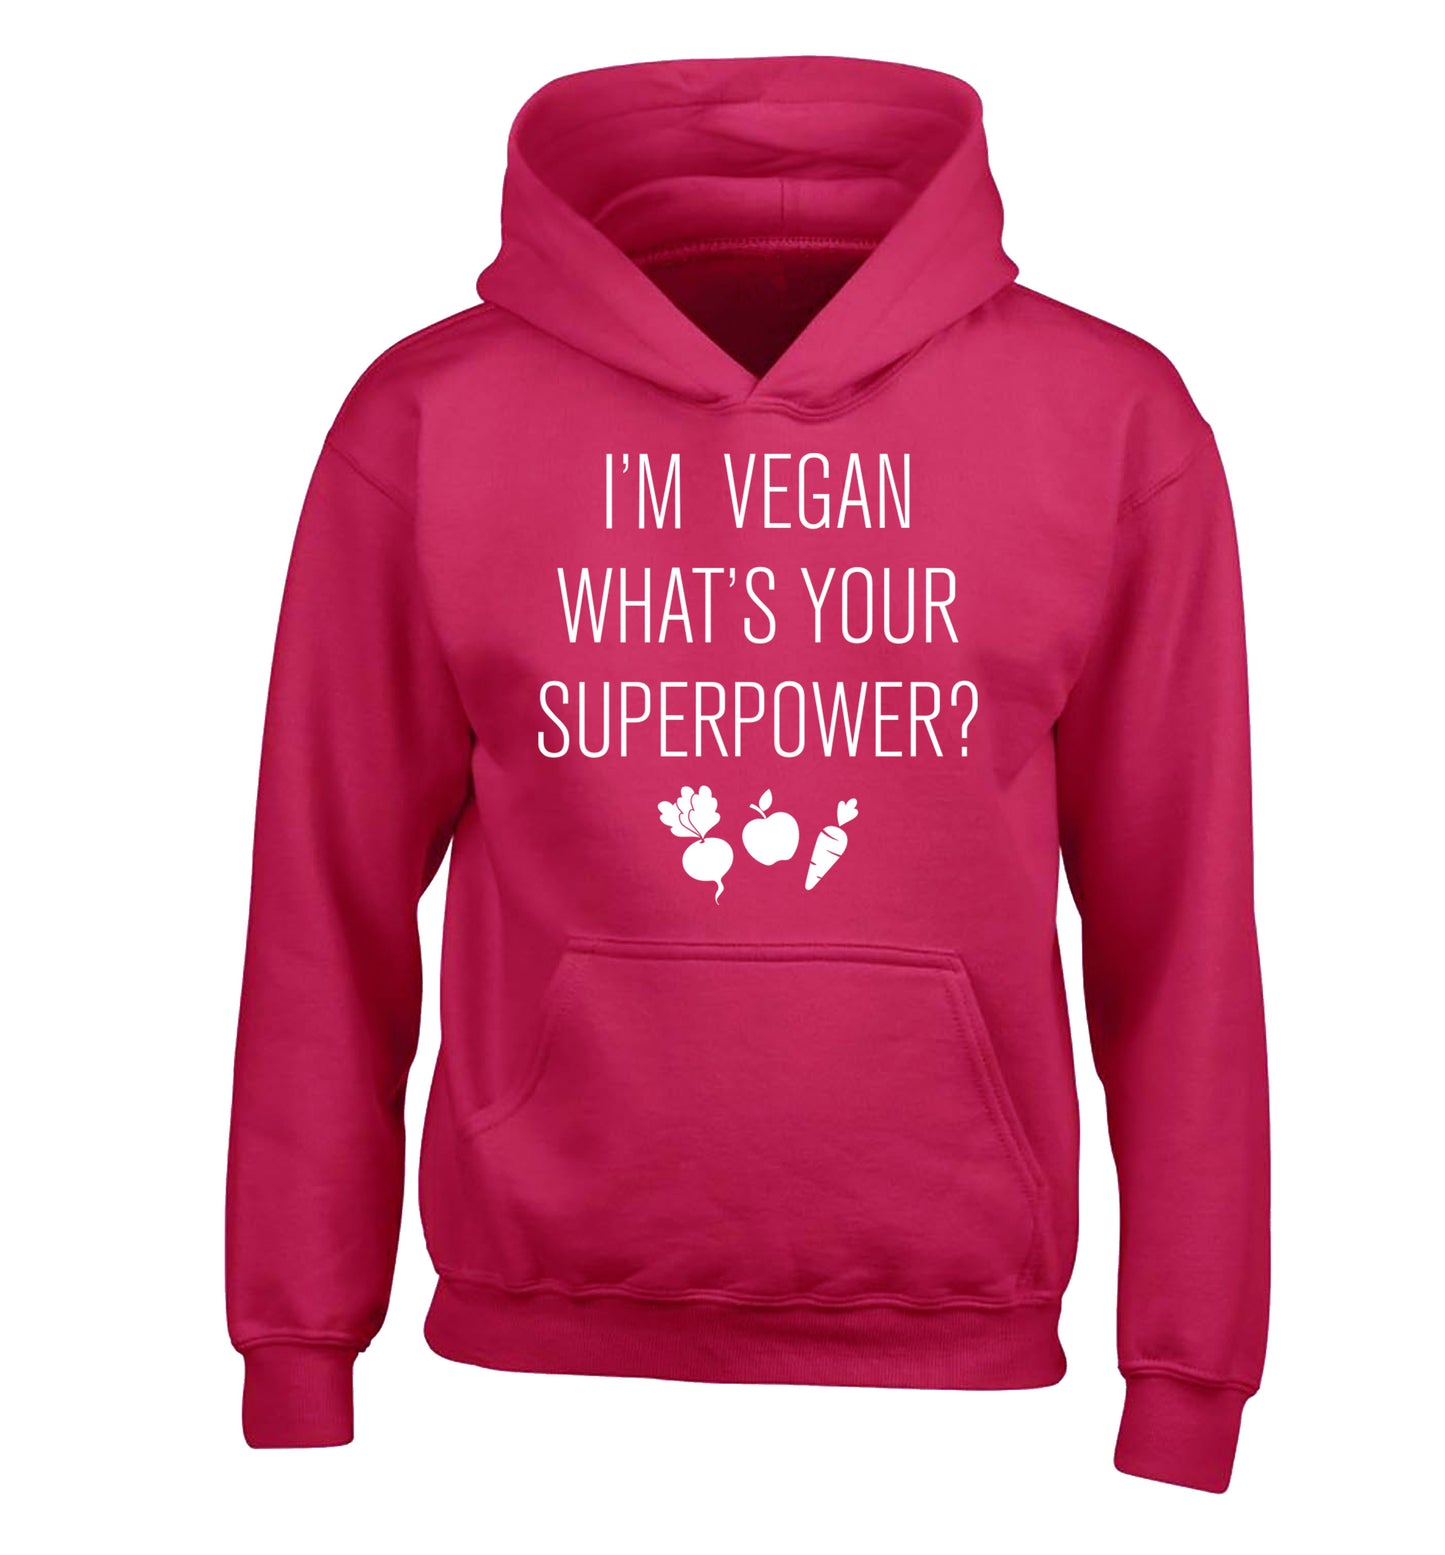 I'm Vegan What's Your Superpower? children's pink hoodie 12-13 Years